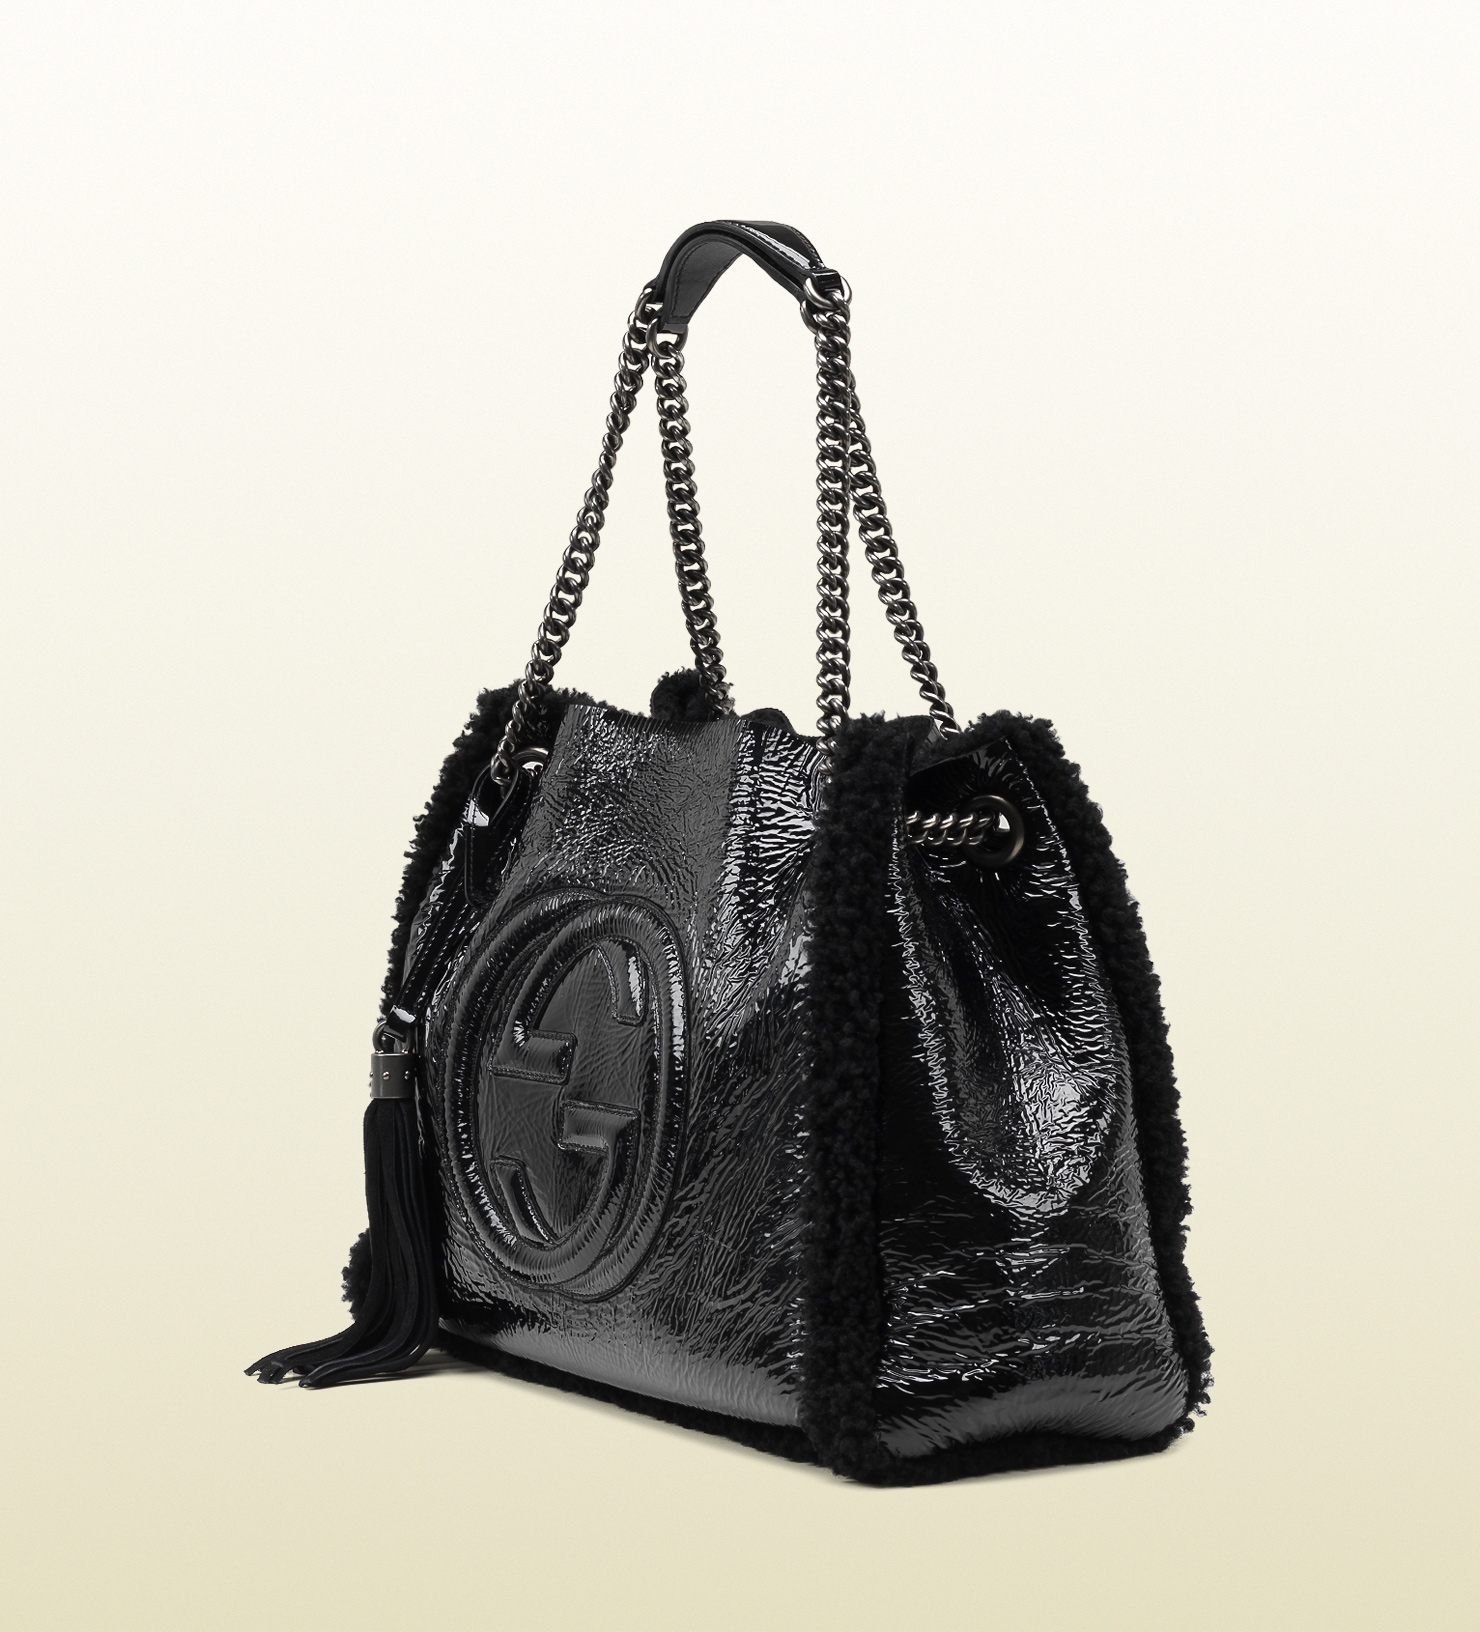 Lyst - Gucci Soho Crushed Patent Leather Shoulder Bag in Black